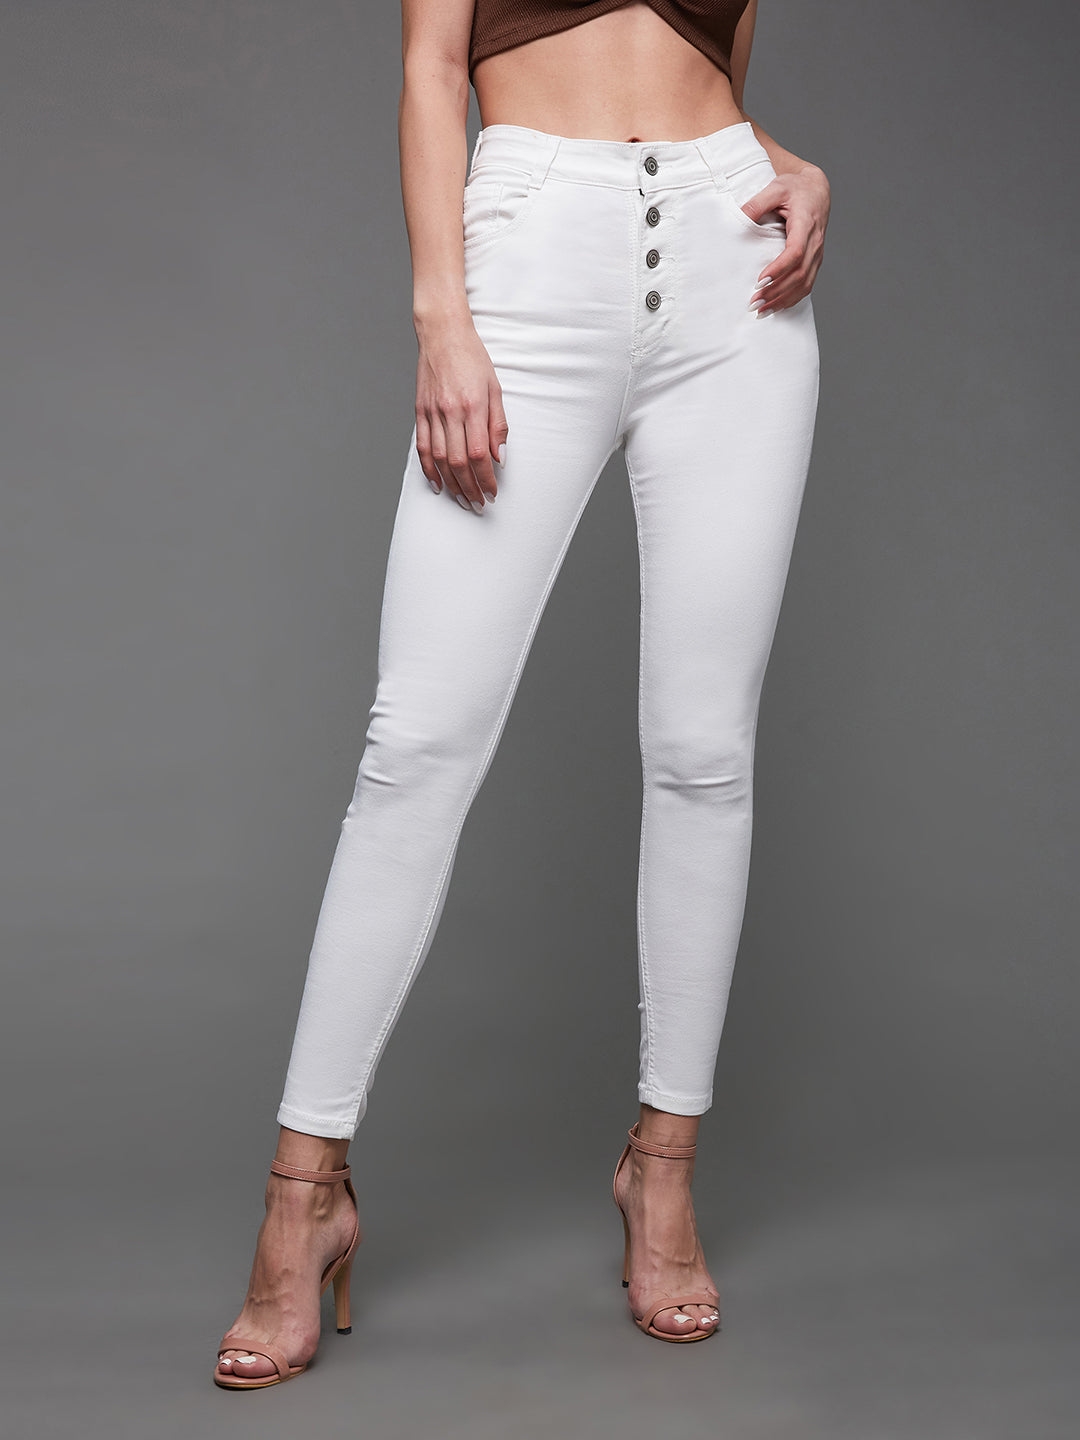 White Skinny Fit High Rise Clean Look Stretchable Regular Length Bleached Denim Jeans